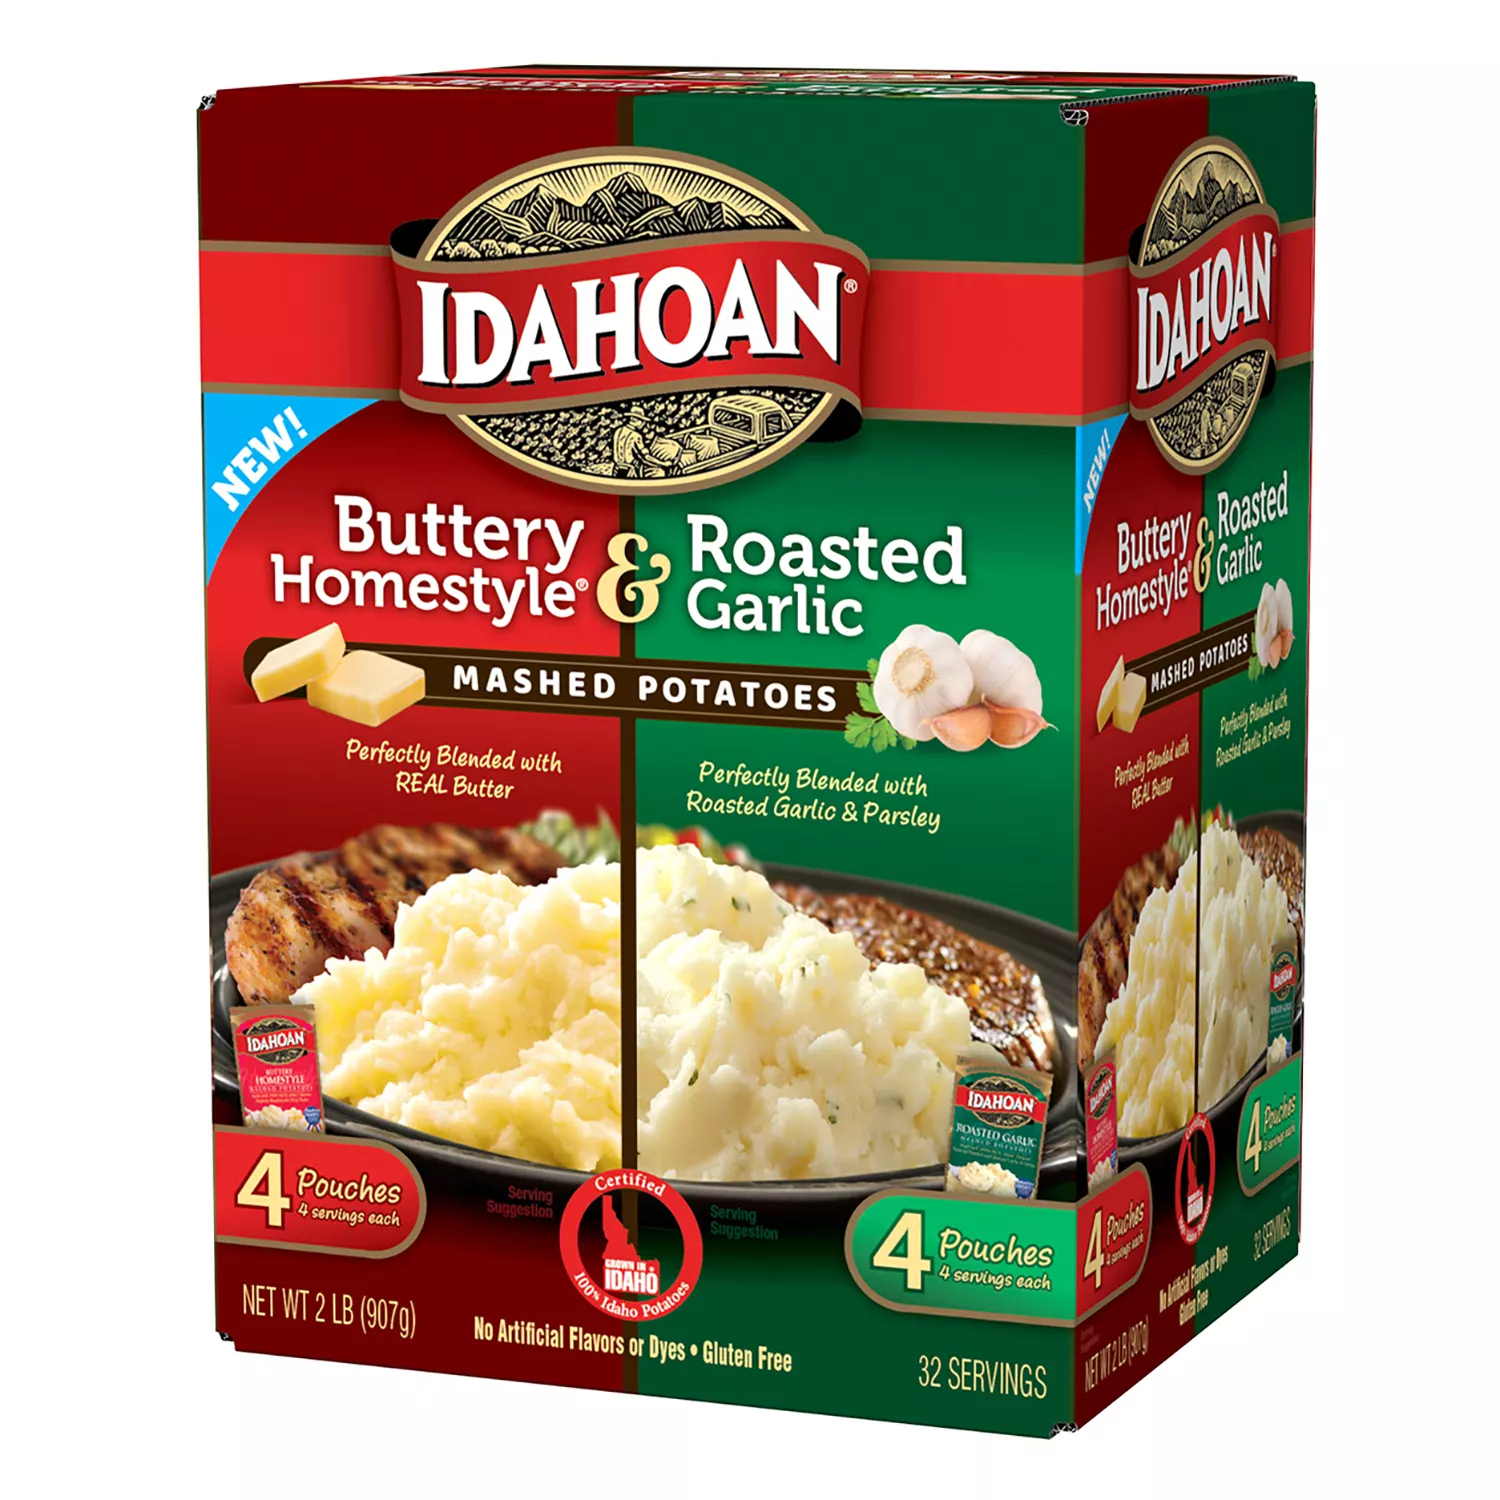 Idahoan Instant Mashed Potatoes Buttery Homestyle and Roasted Garlic